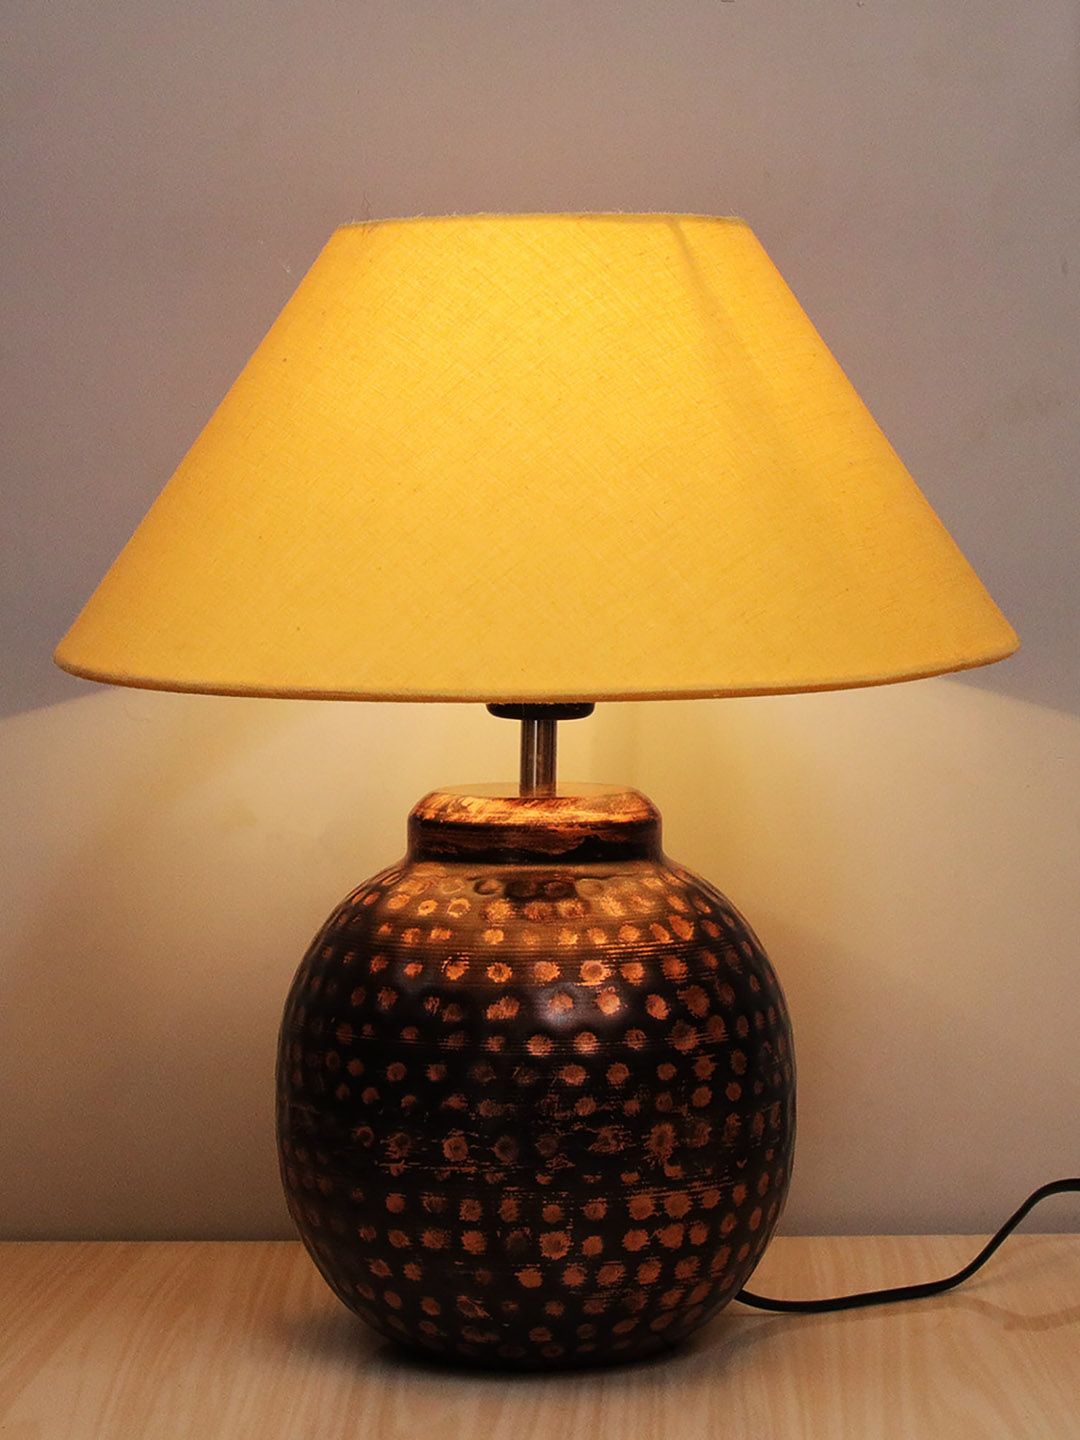 Homesake Brown Oil-Rubbed Ginger Jar Antique Hammered Table Lamp with Golden Shade Price in India